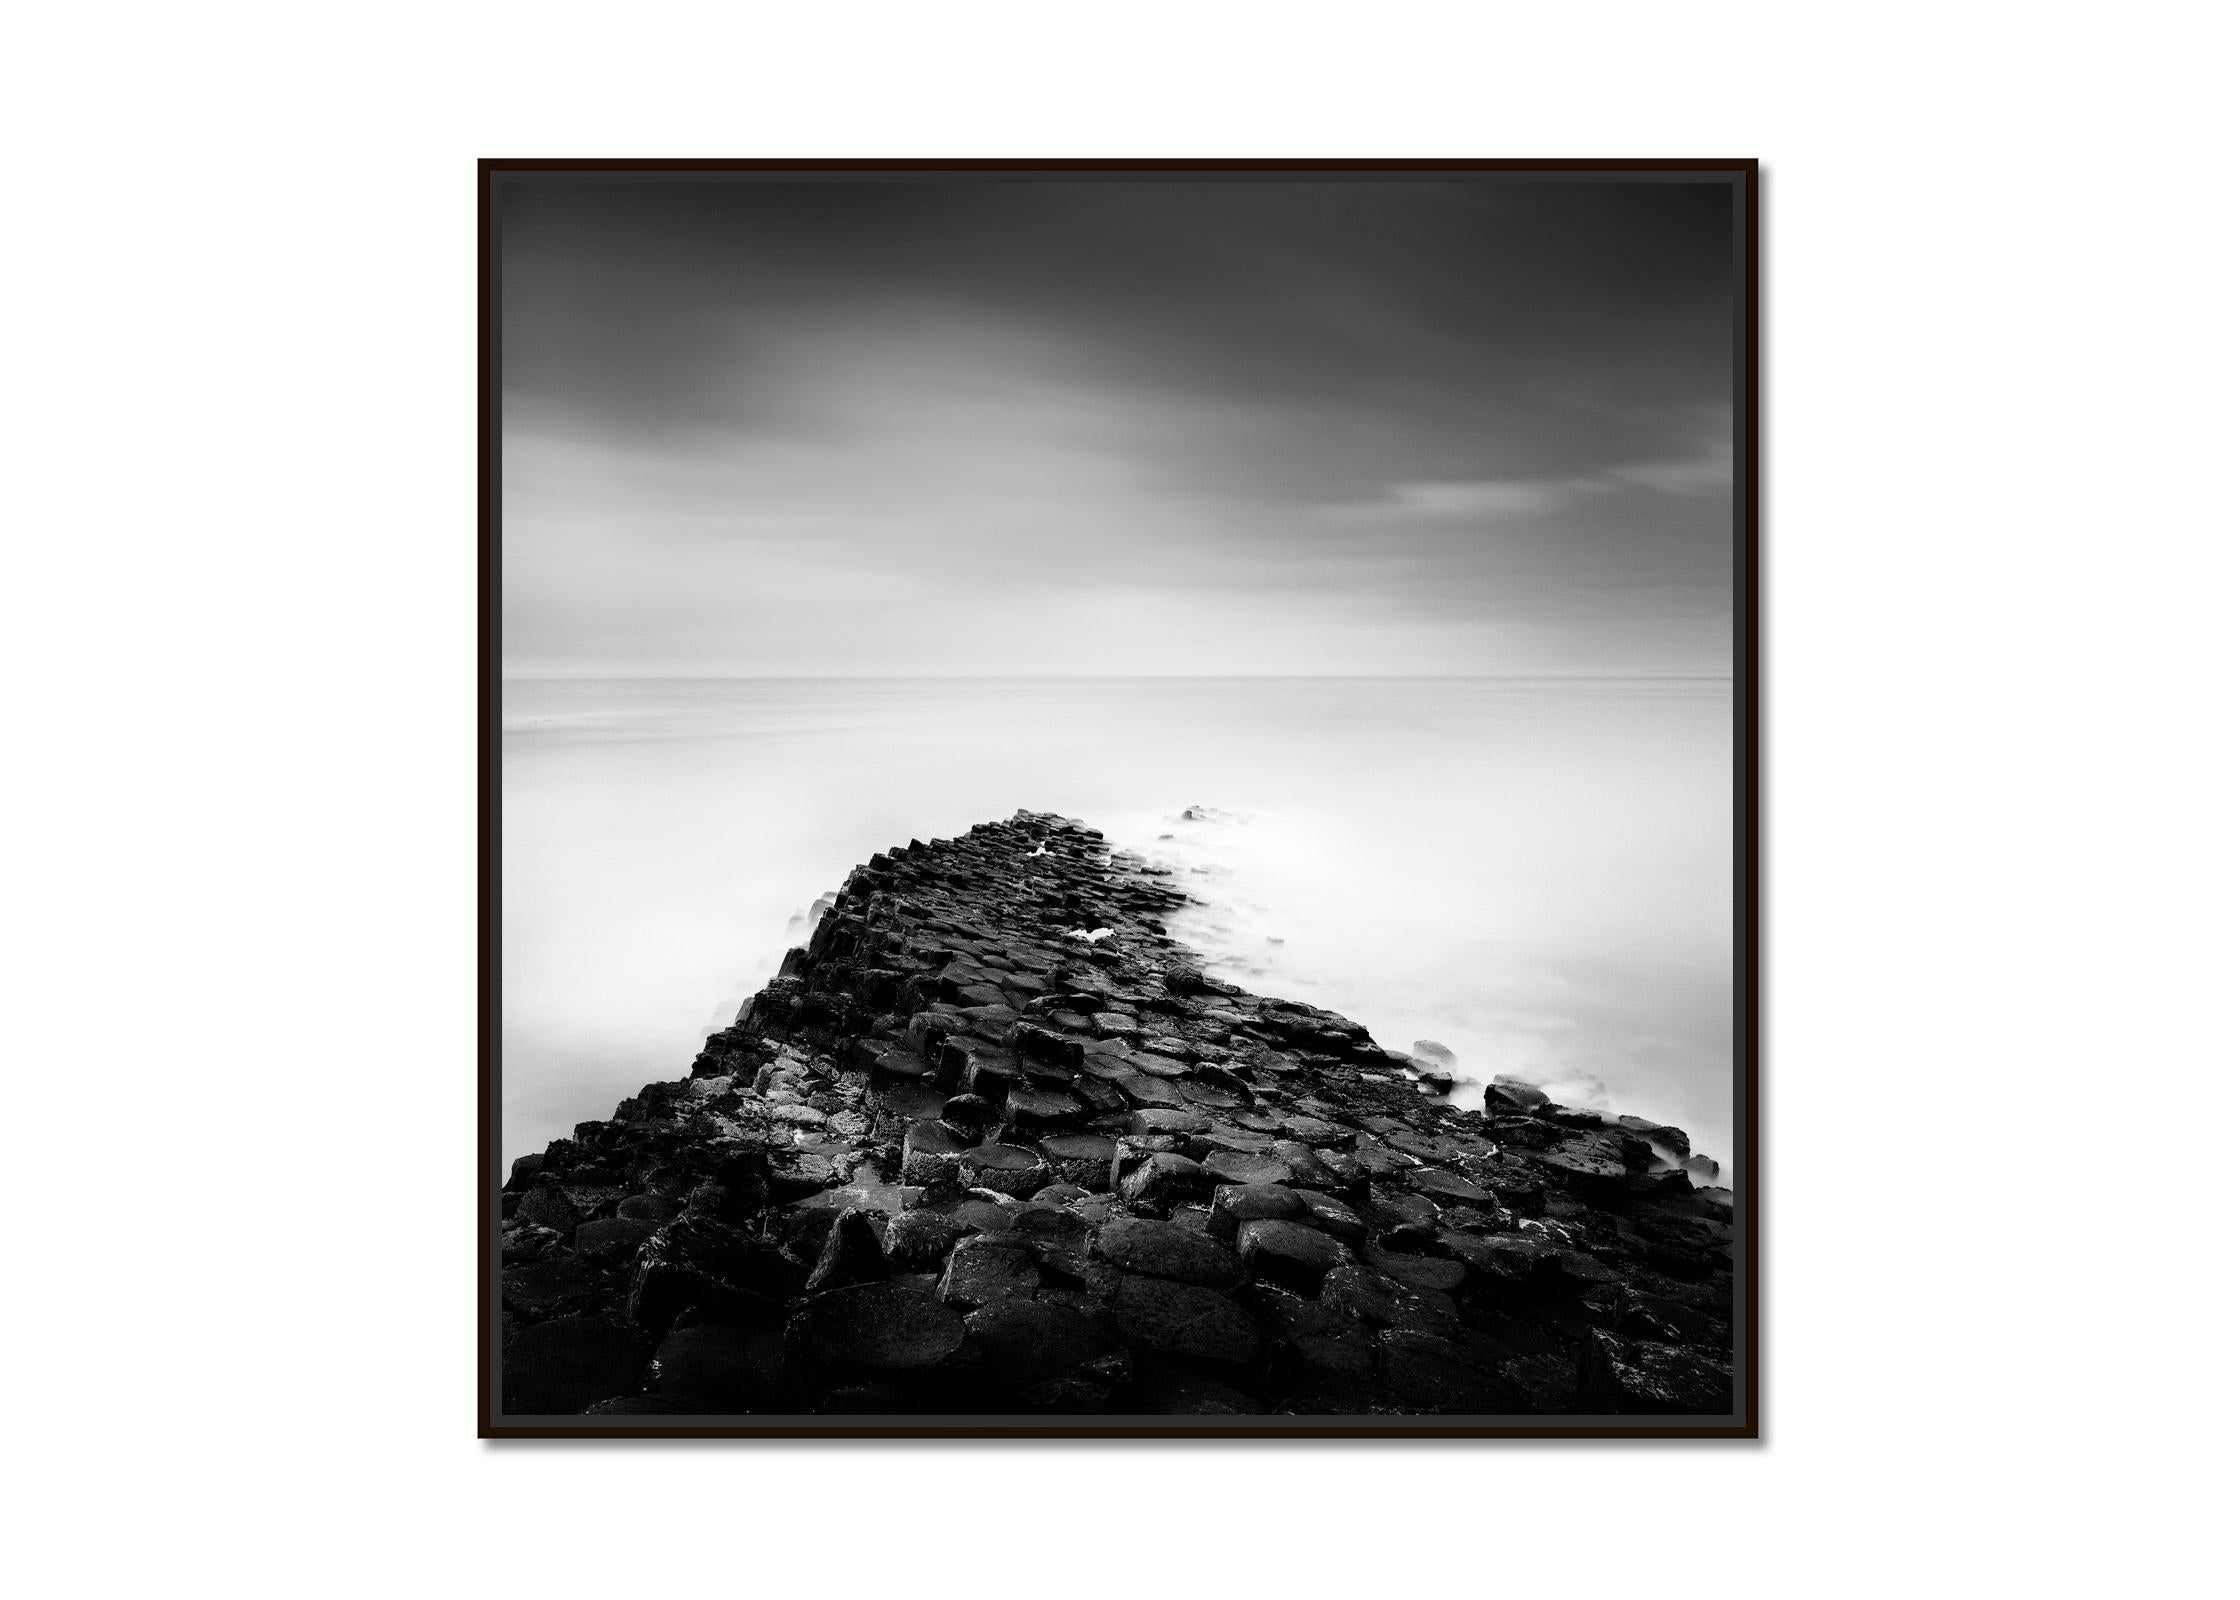 Giants Causeway Coast, Ireland, black and white fine art photography, landscape - Photograph by Gerald Berghammer